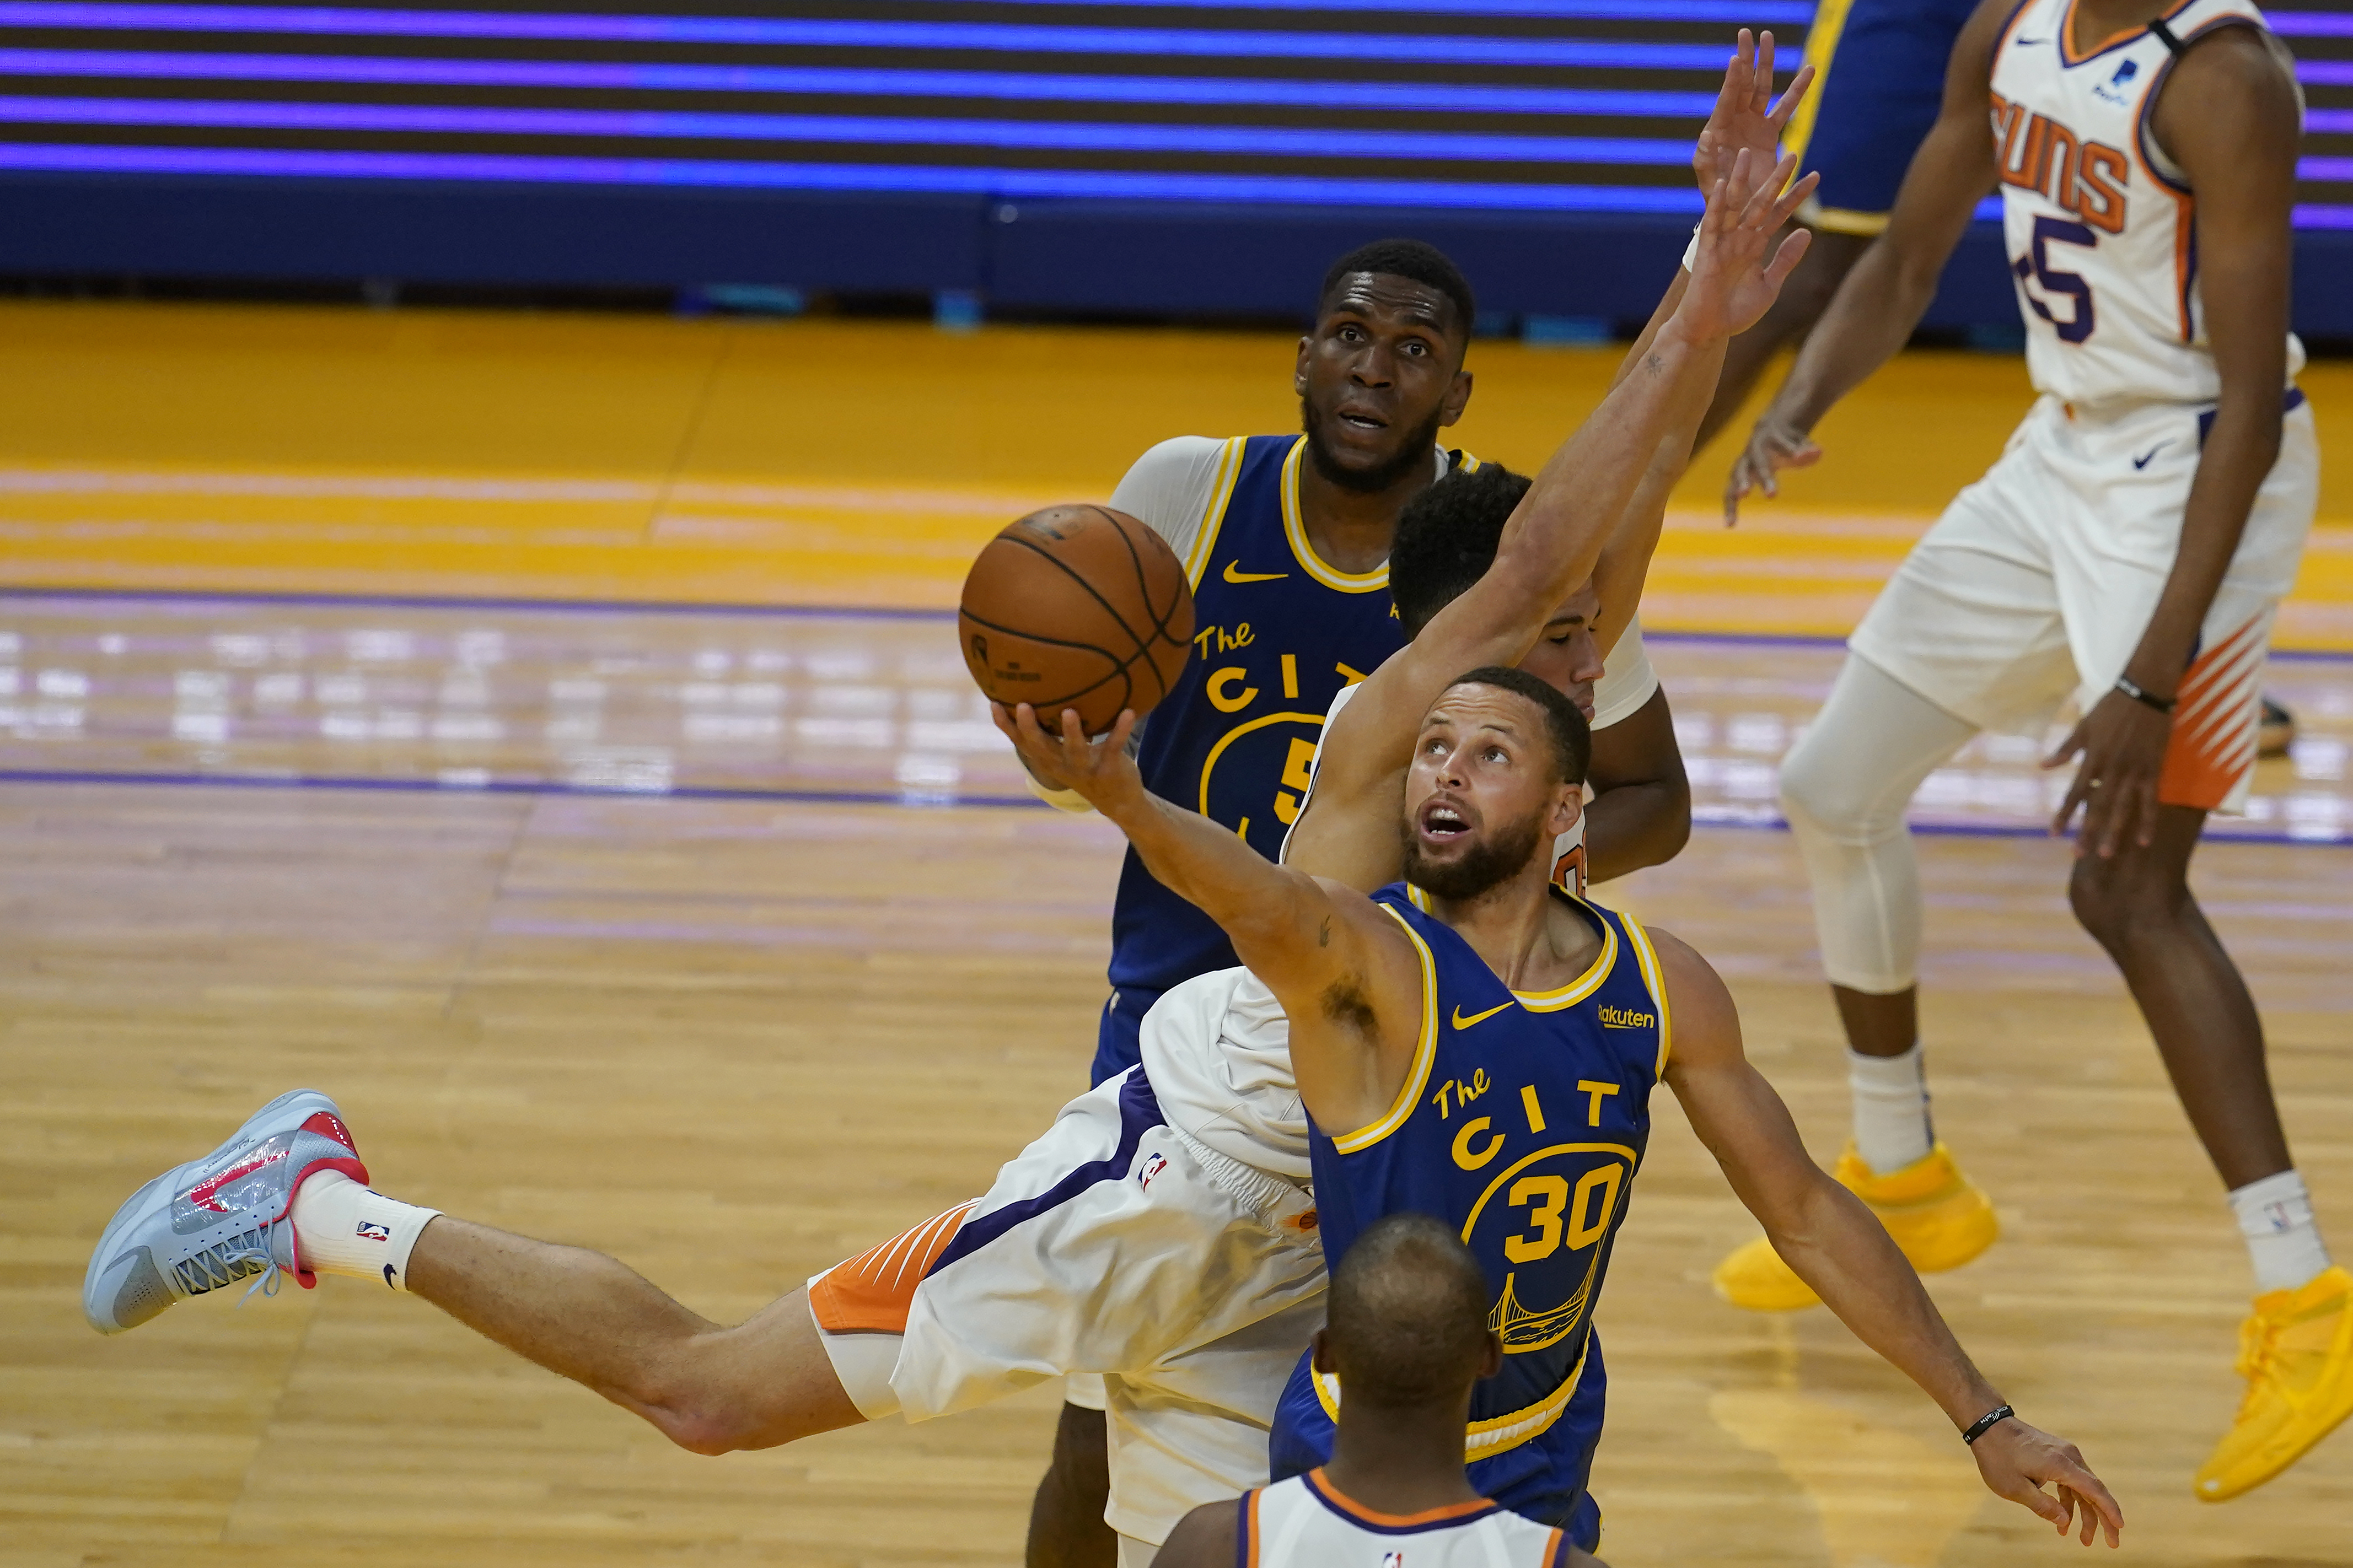 Warriors' Steph Curry notches 24 points in return from injury vs. Suns